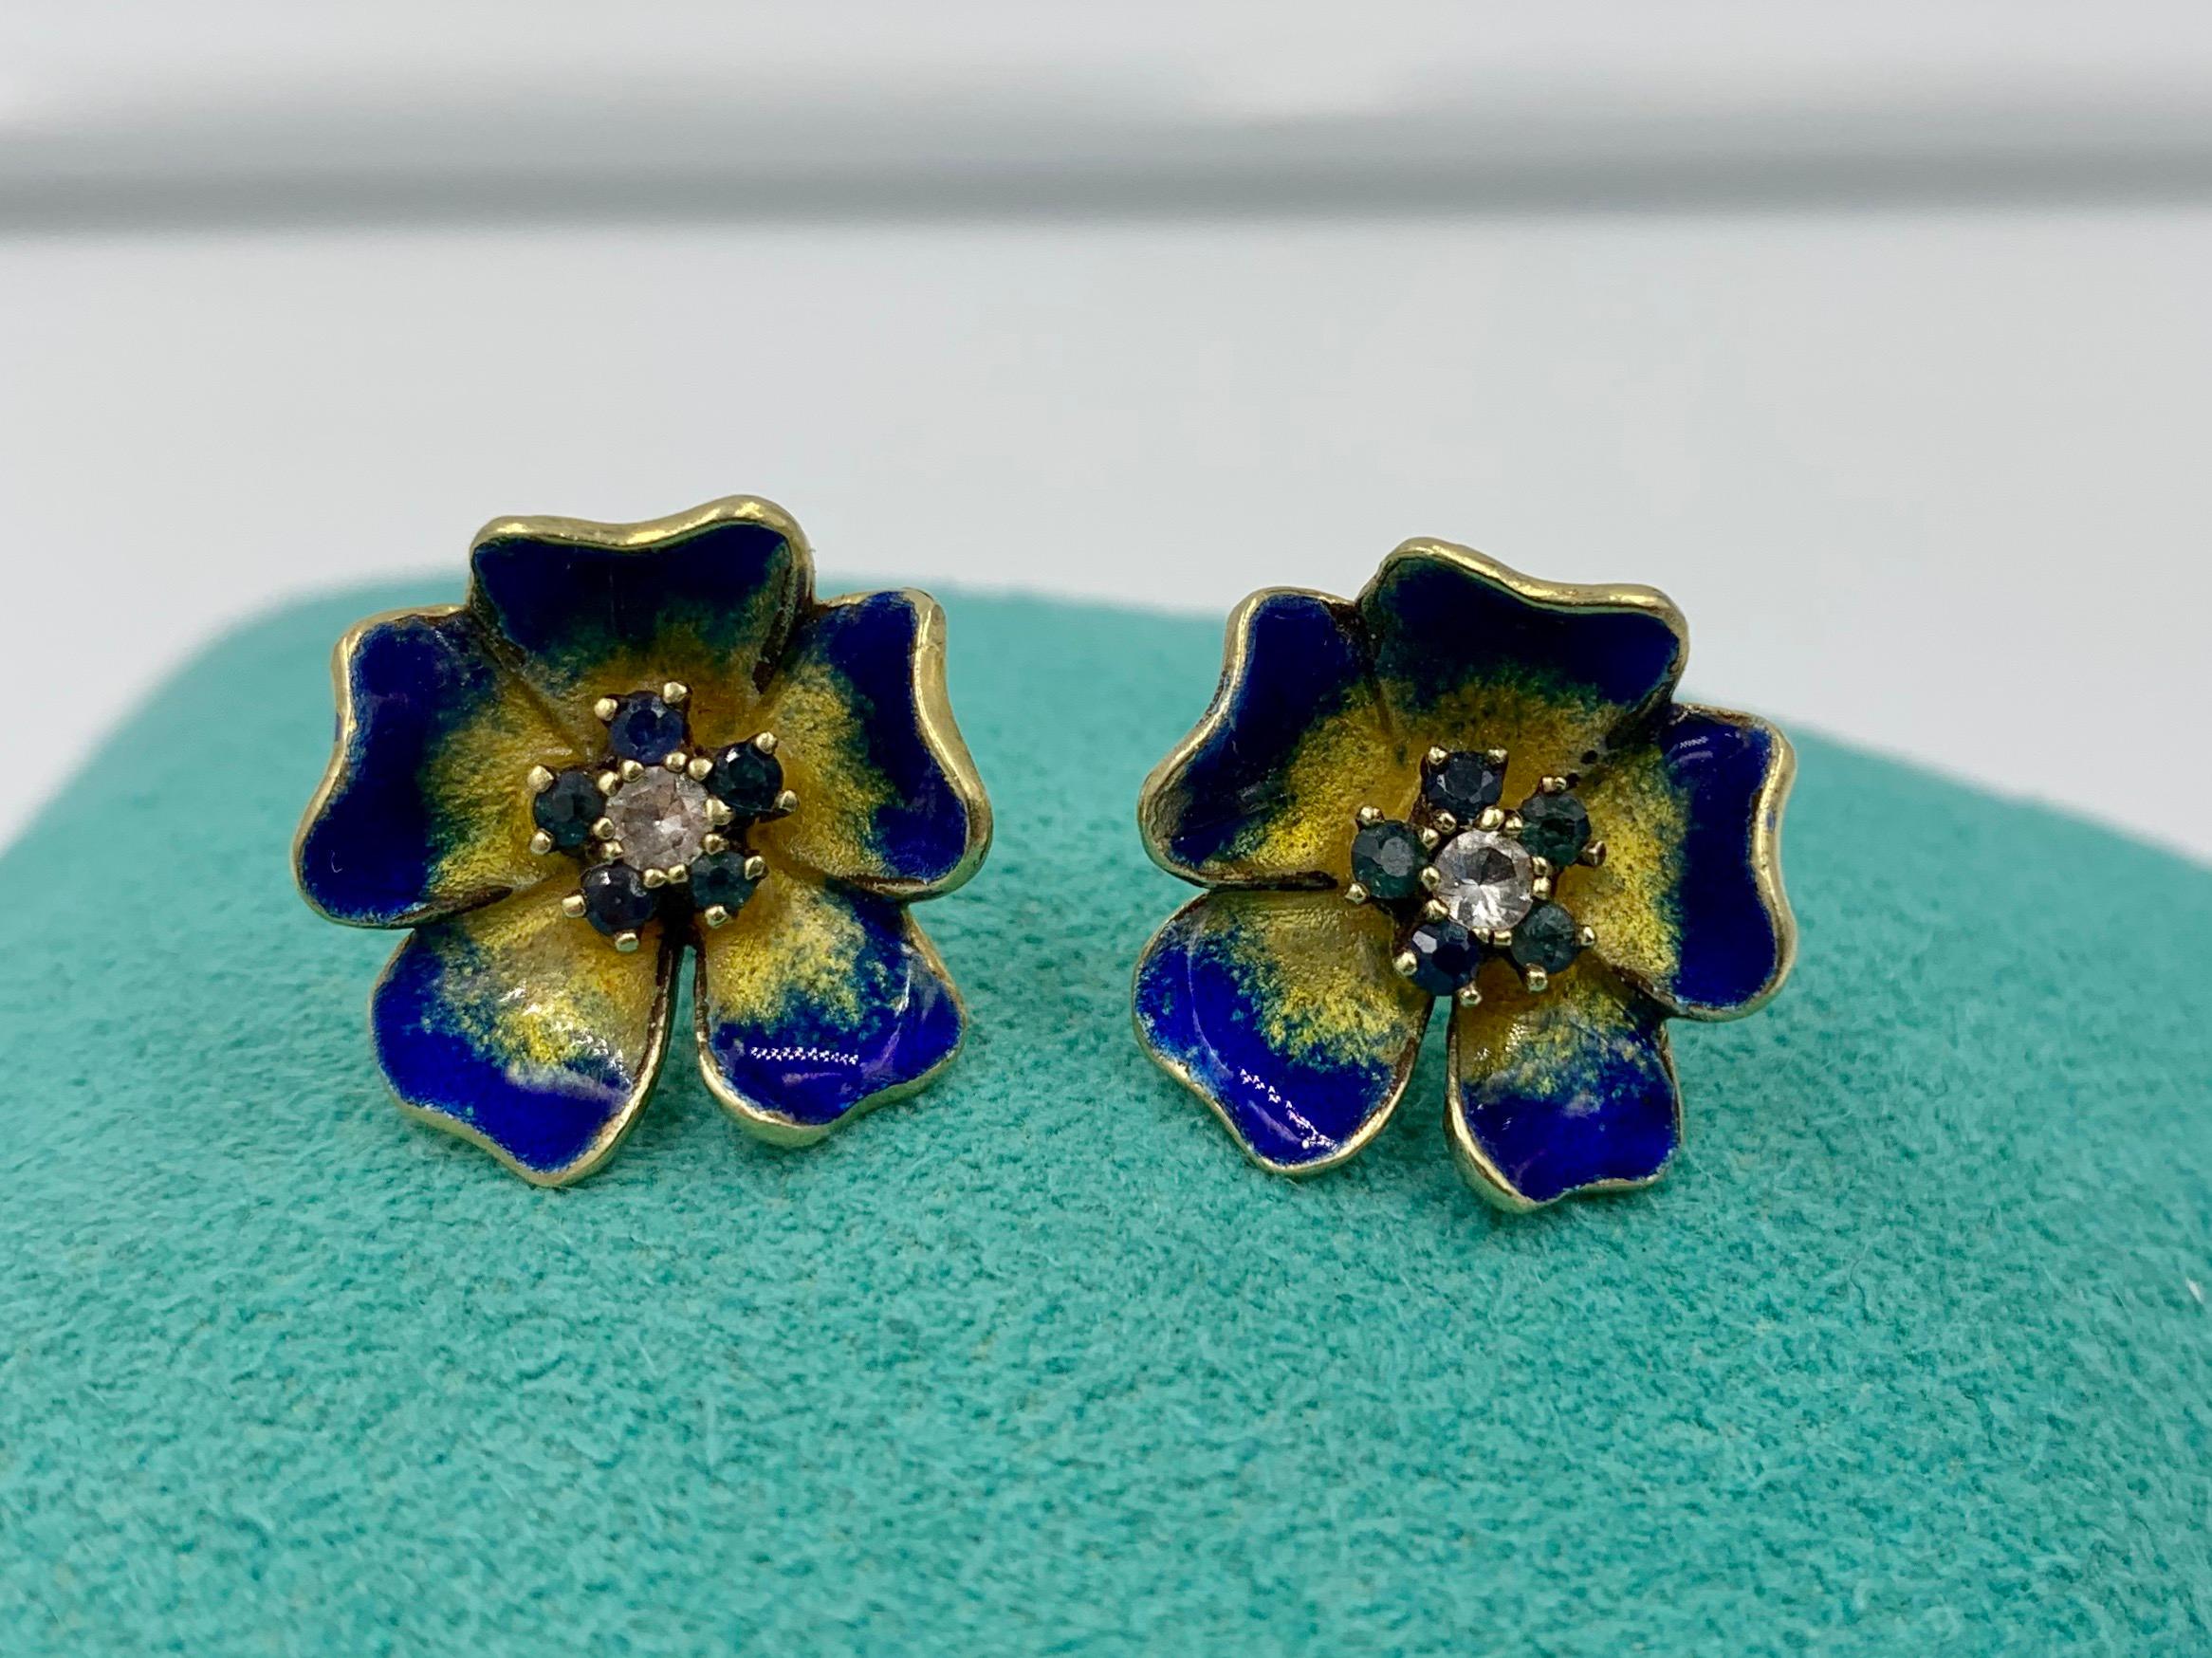 A gorgeous pair of Antique Pansy Flower Earrings with Diamond and Sapphire centers in beautifully modeled and enameled petals.  The earrings are 14 Karat Gold.  These beautiful flower earrings are so delicate and romantic and are just the perfect